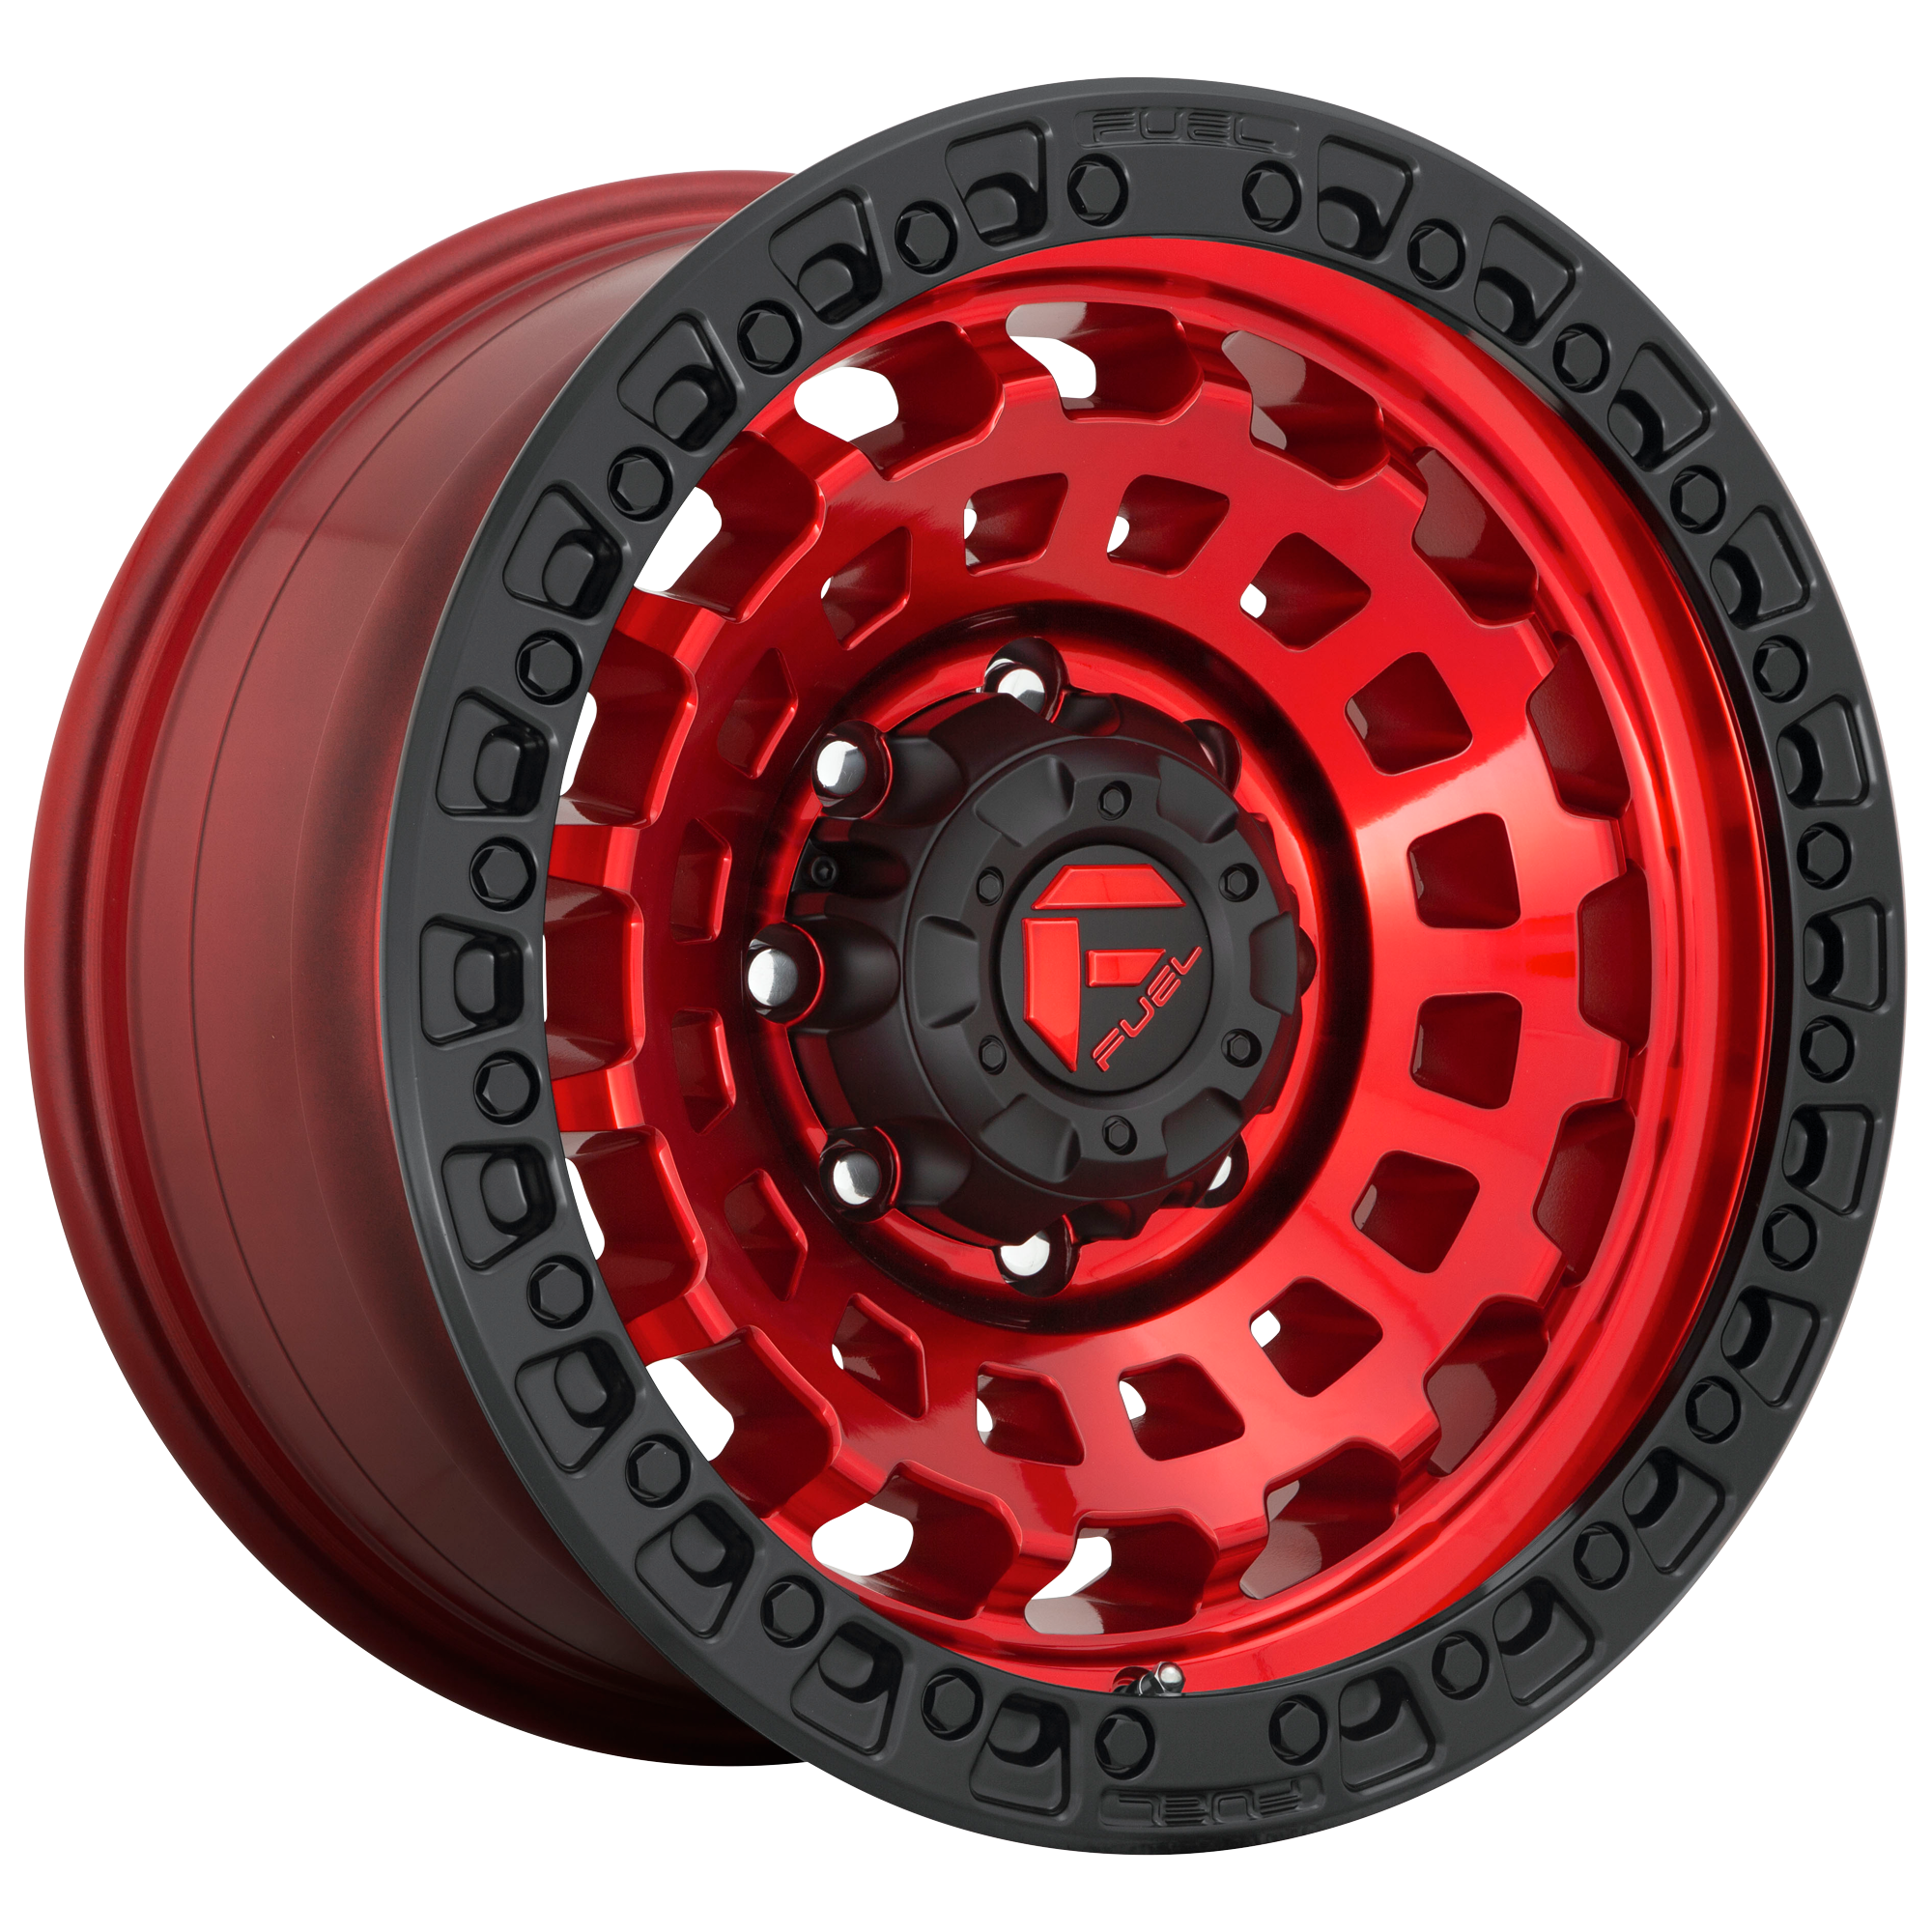 ZEPHYR 20x9 8x165.10 CANDY RED BLACK BEAD RING (1 mm) - Tires and Engine Performance